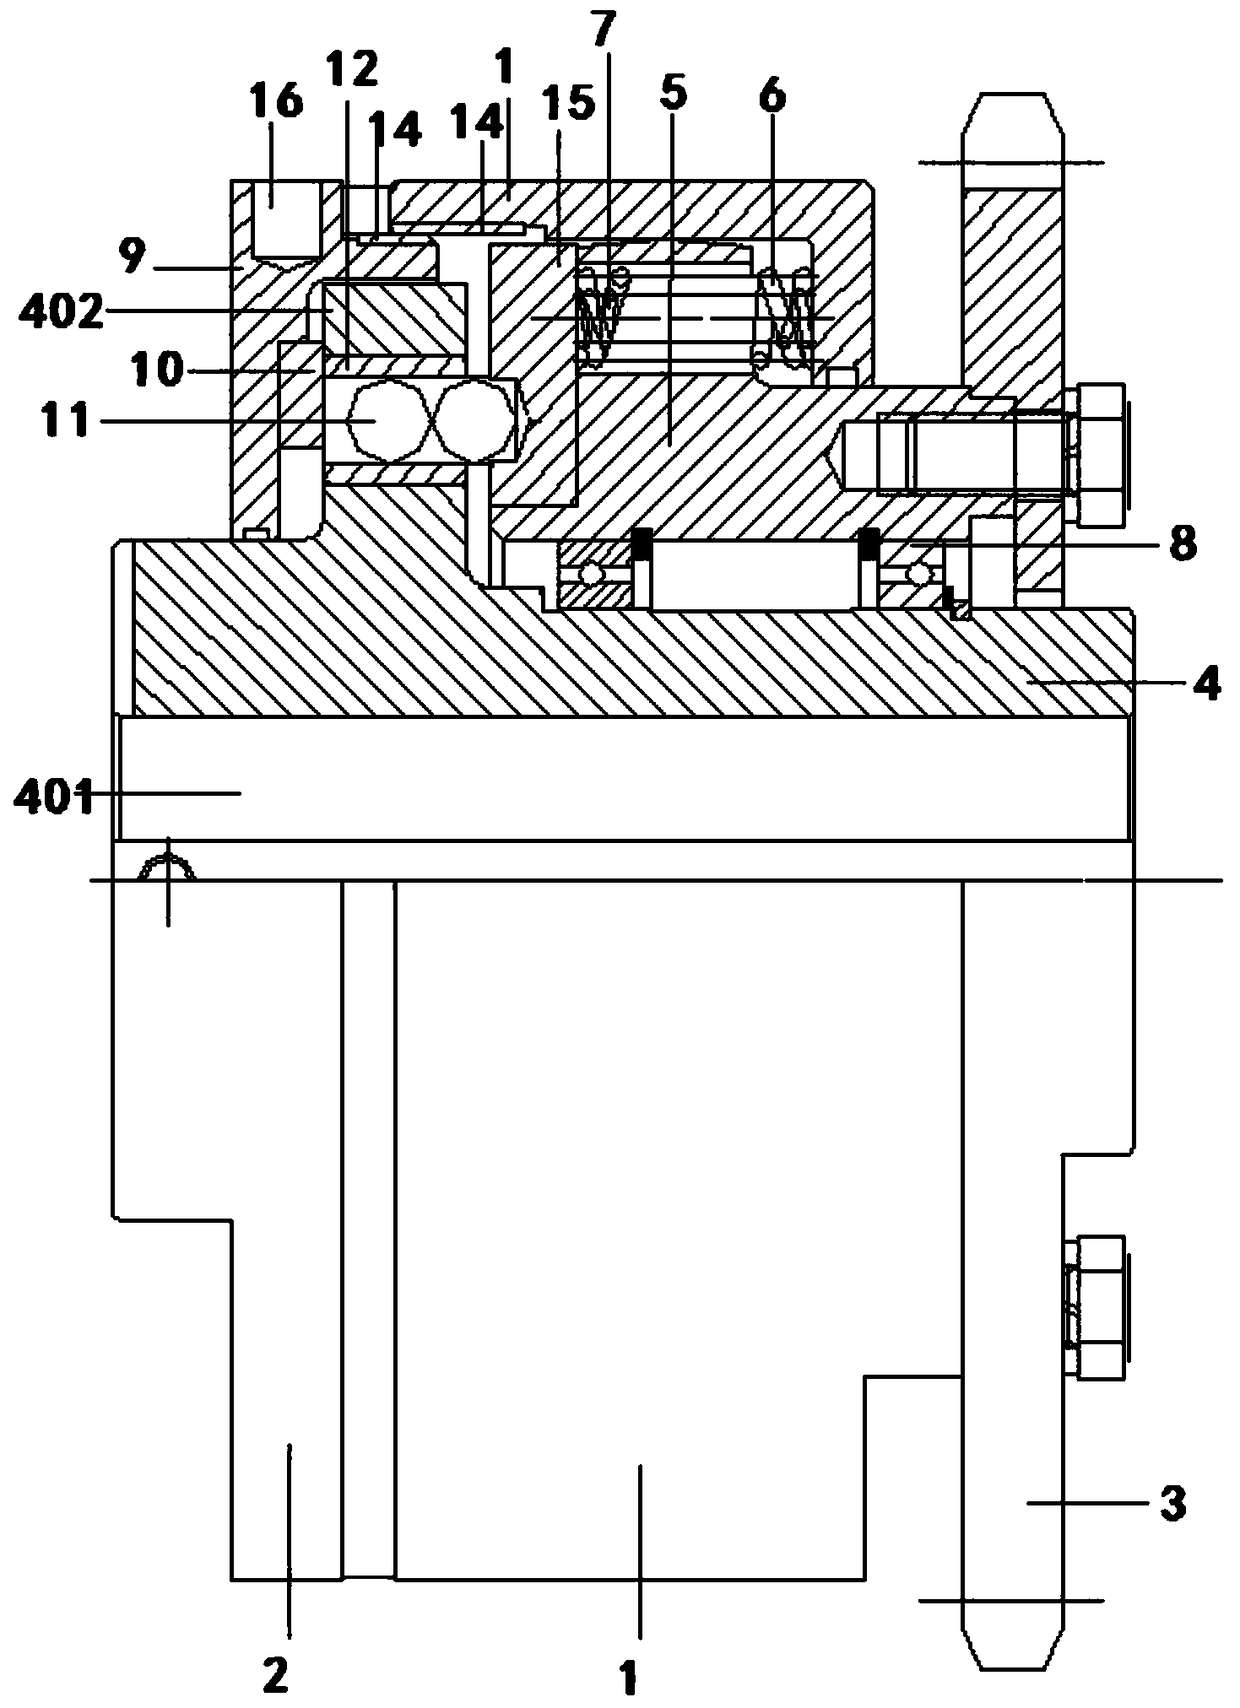 A clutch based on wind conveying system device